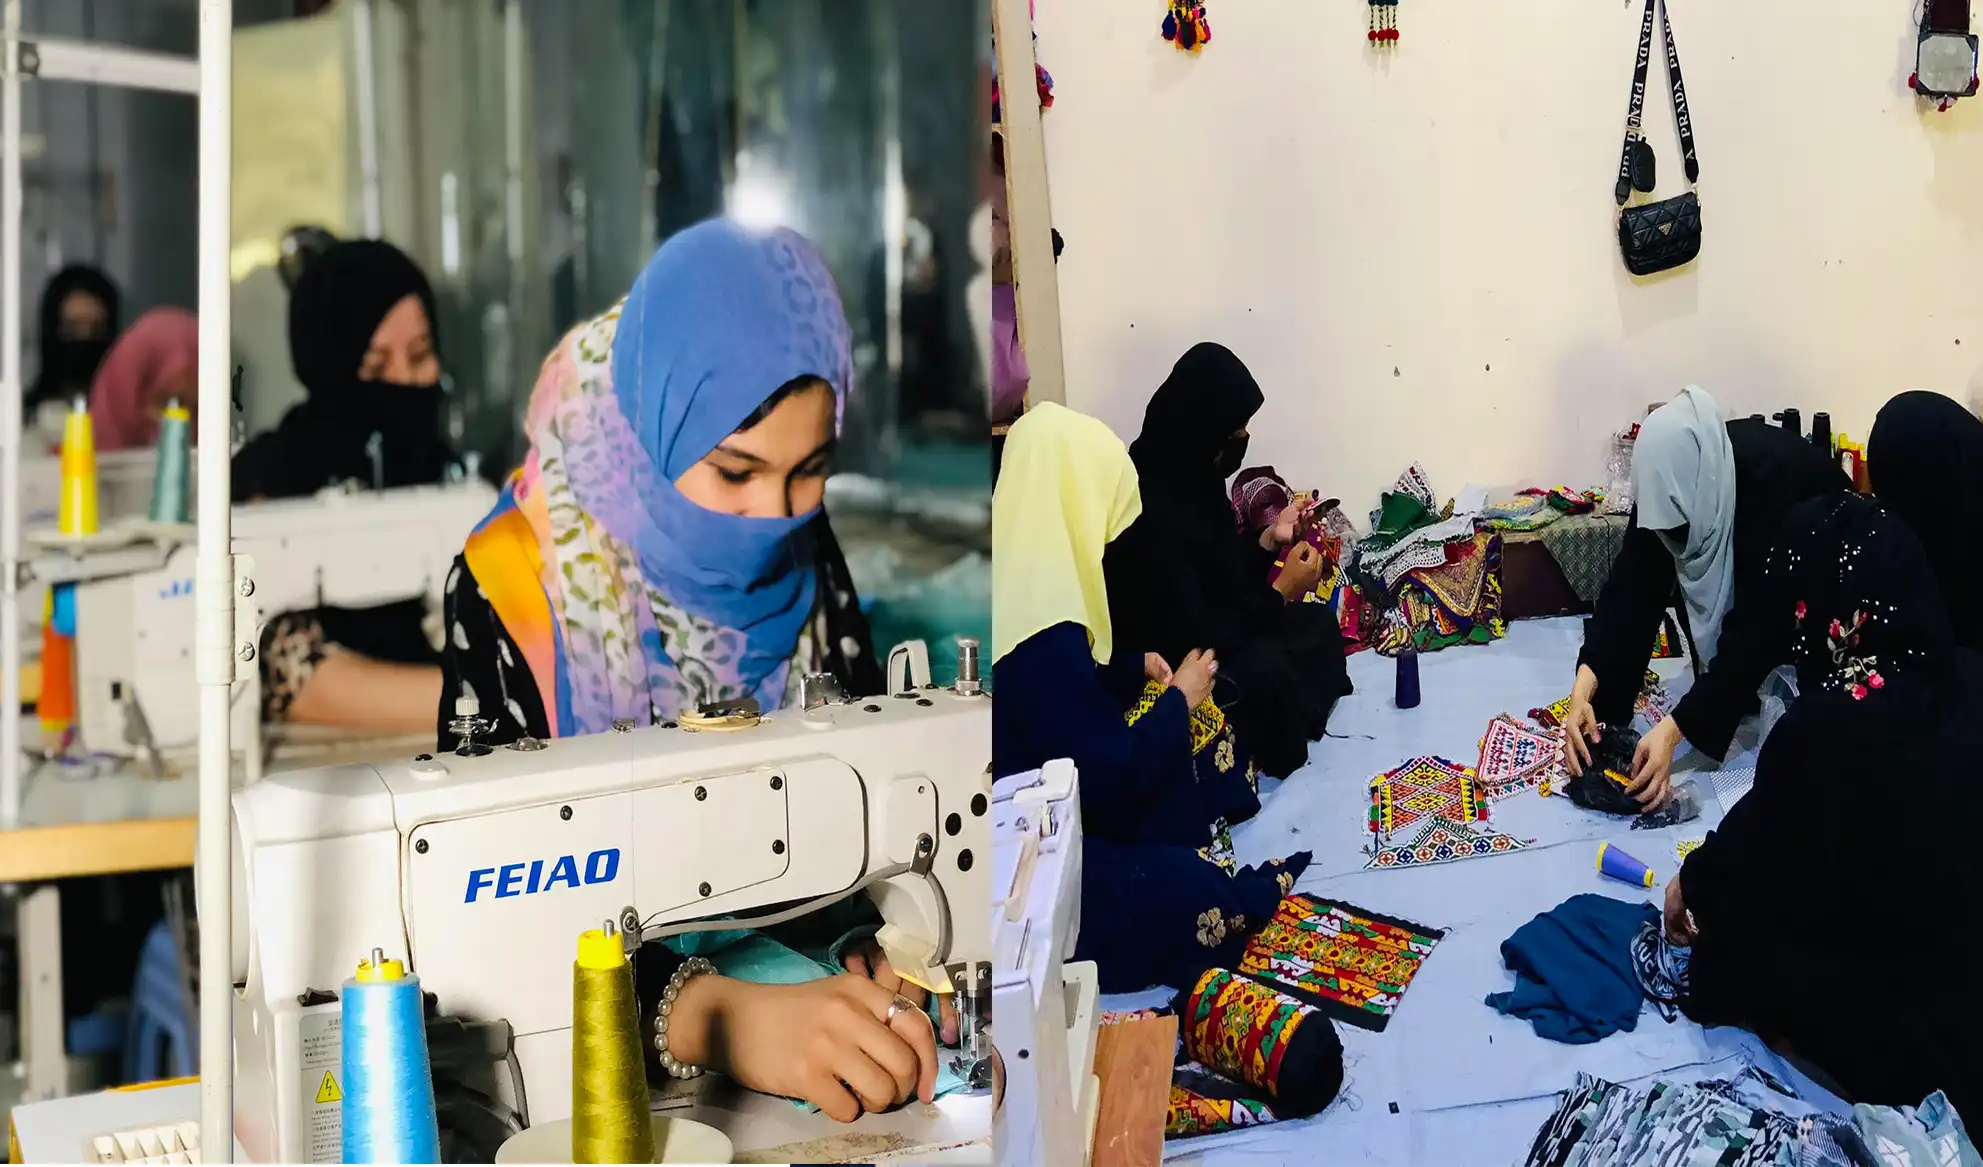 Women manage 800 factories, companies in Balkh